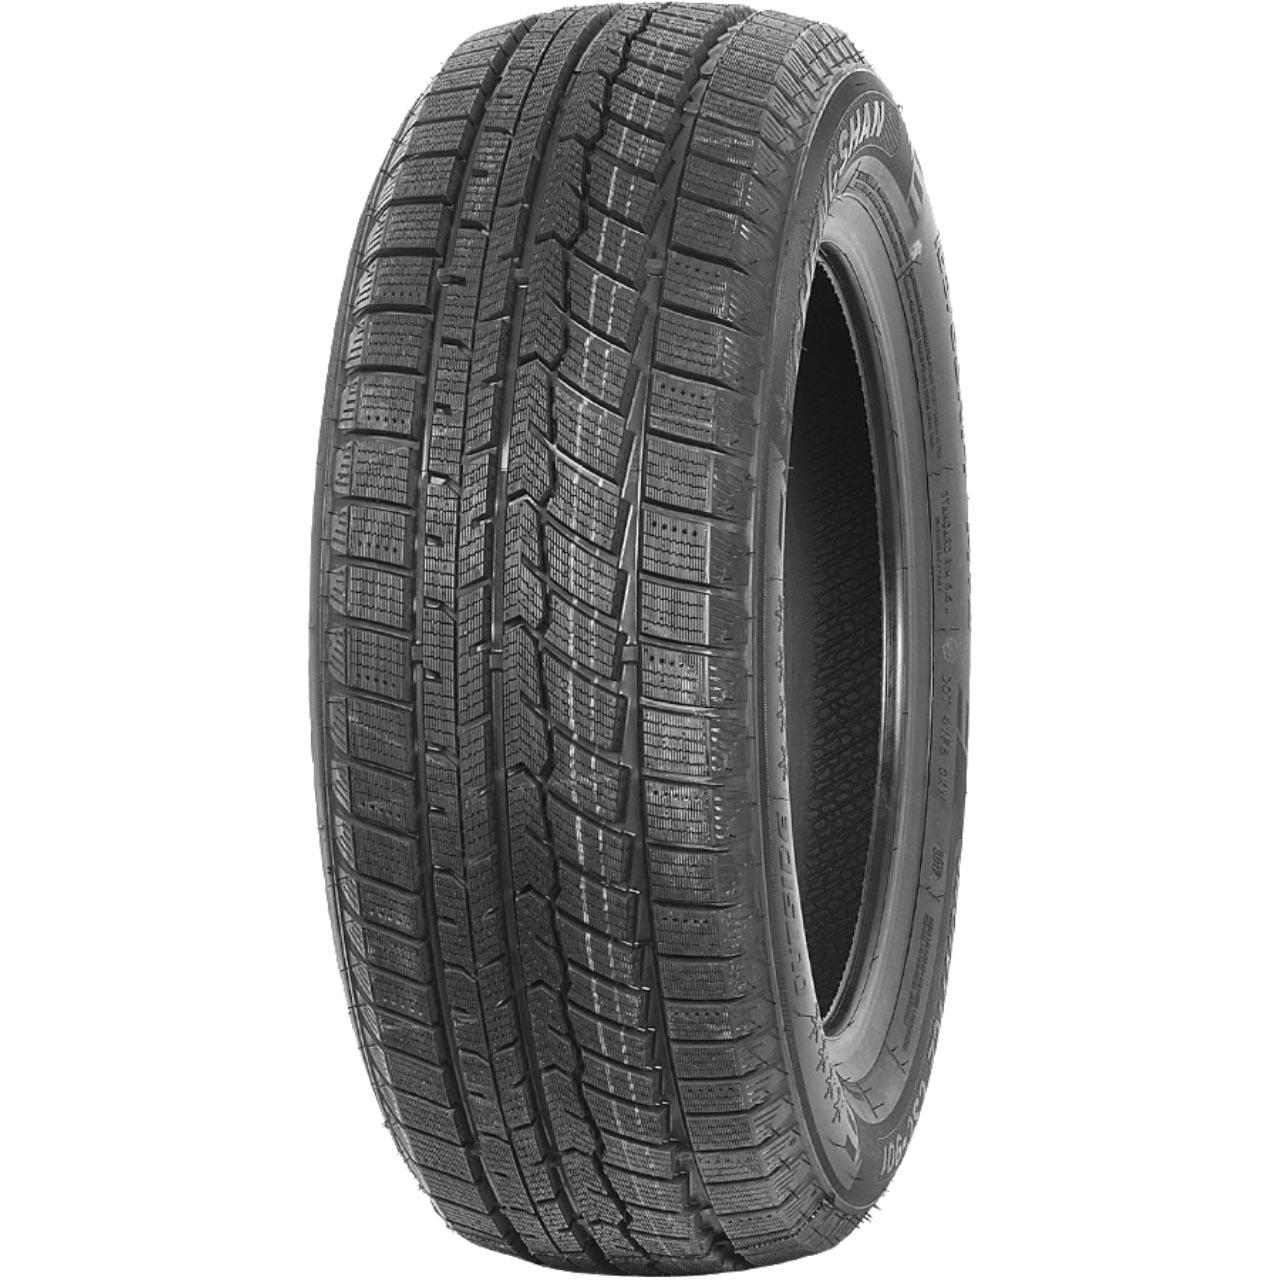 CHENGSHAN MONTICE CSC-901 215/65R16 98H BSW